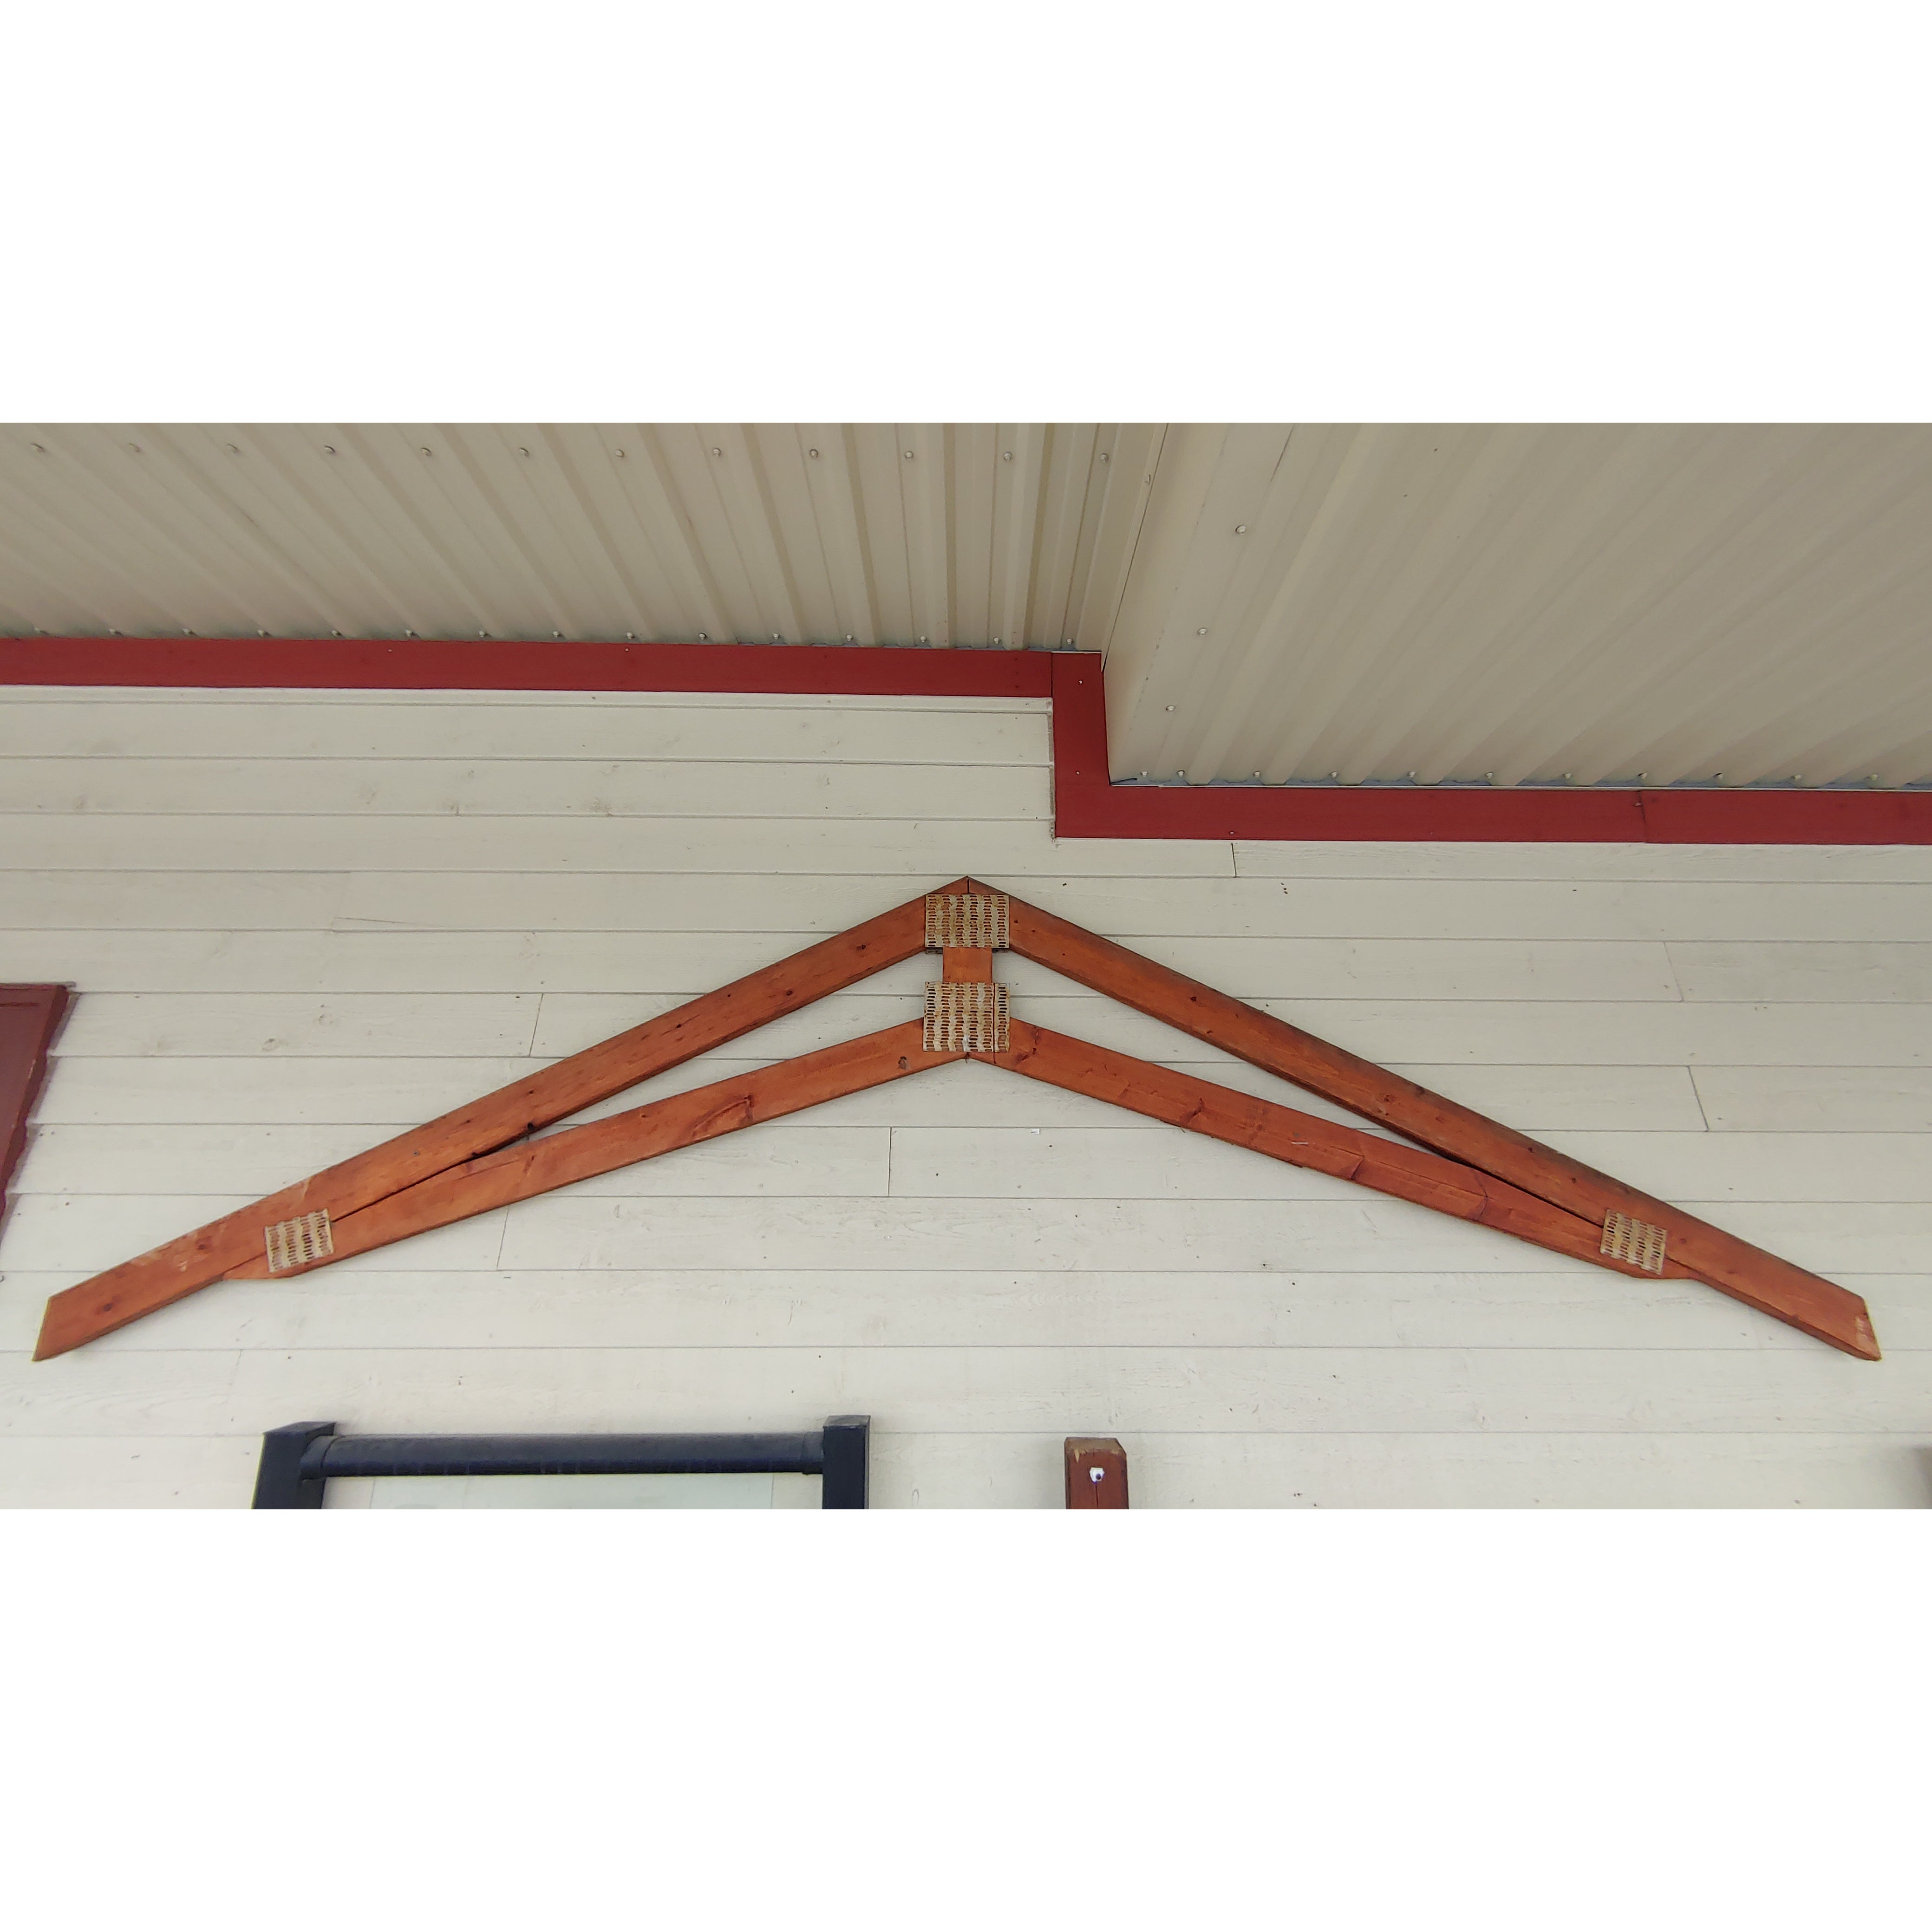 10' SHED TRUSS 6/12 PITCH